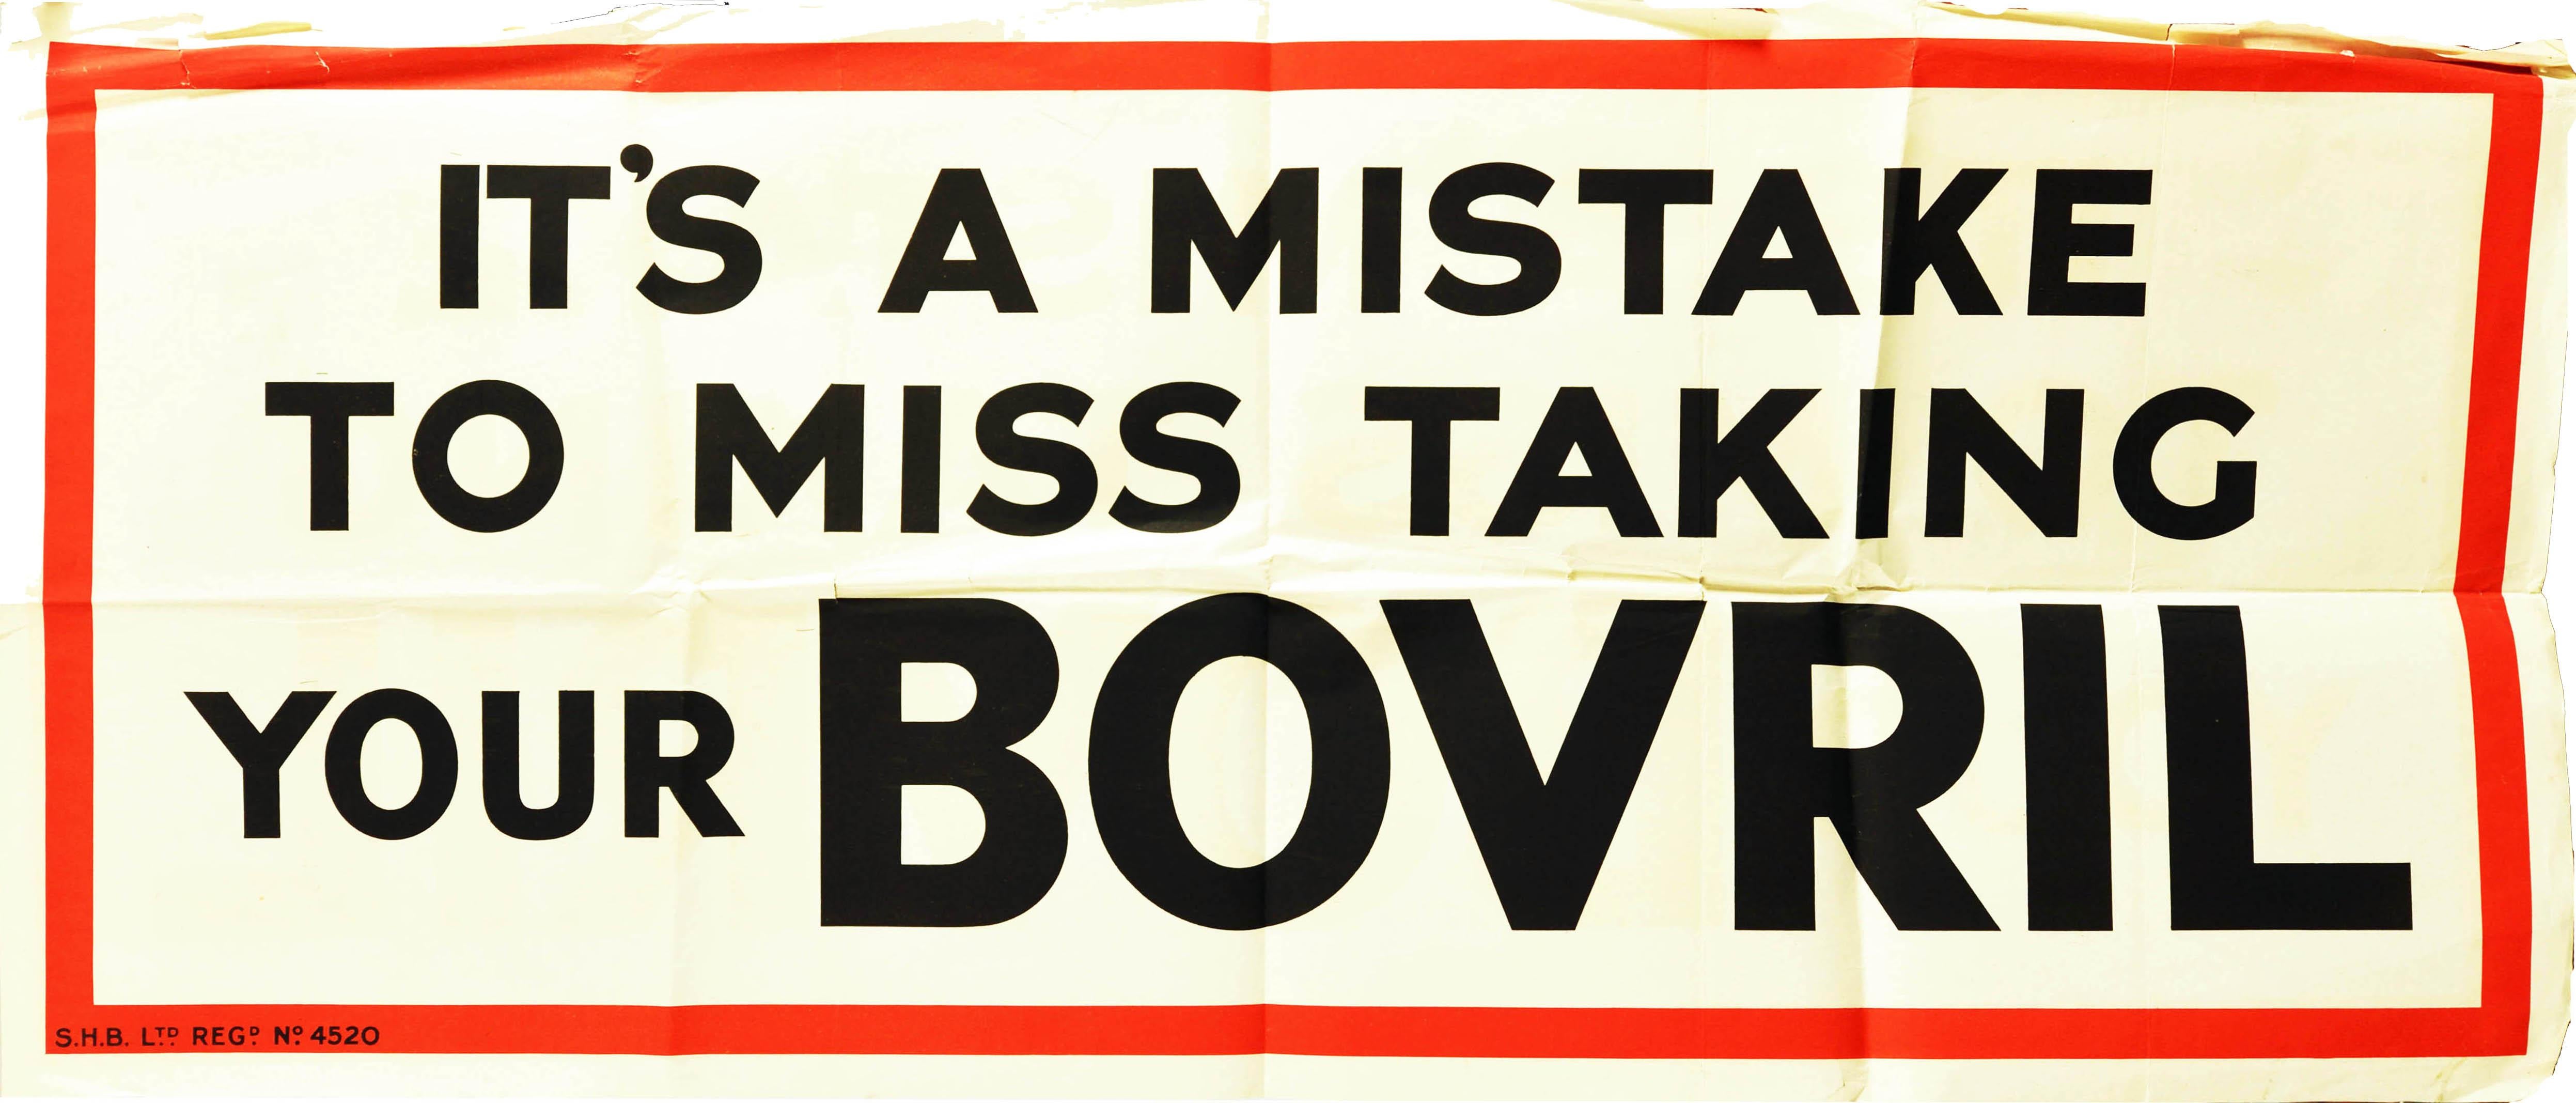 Original vintage food advertising poster for Bovril - It's a mistake to miss taking your Bovril - featuring bold black lettering on a white background in a red frame border. Printed in Britain in the 1930s, this campaign used puns and word play to